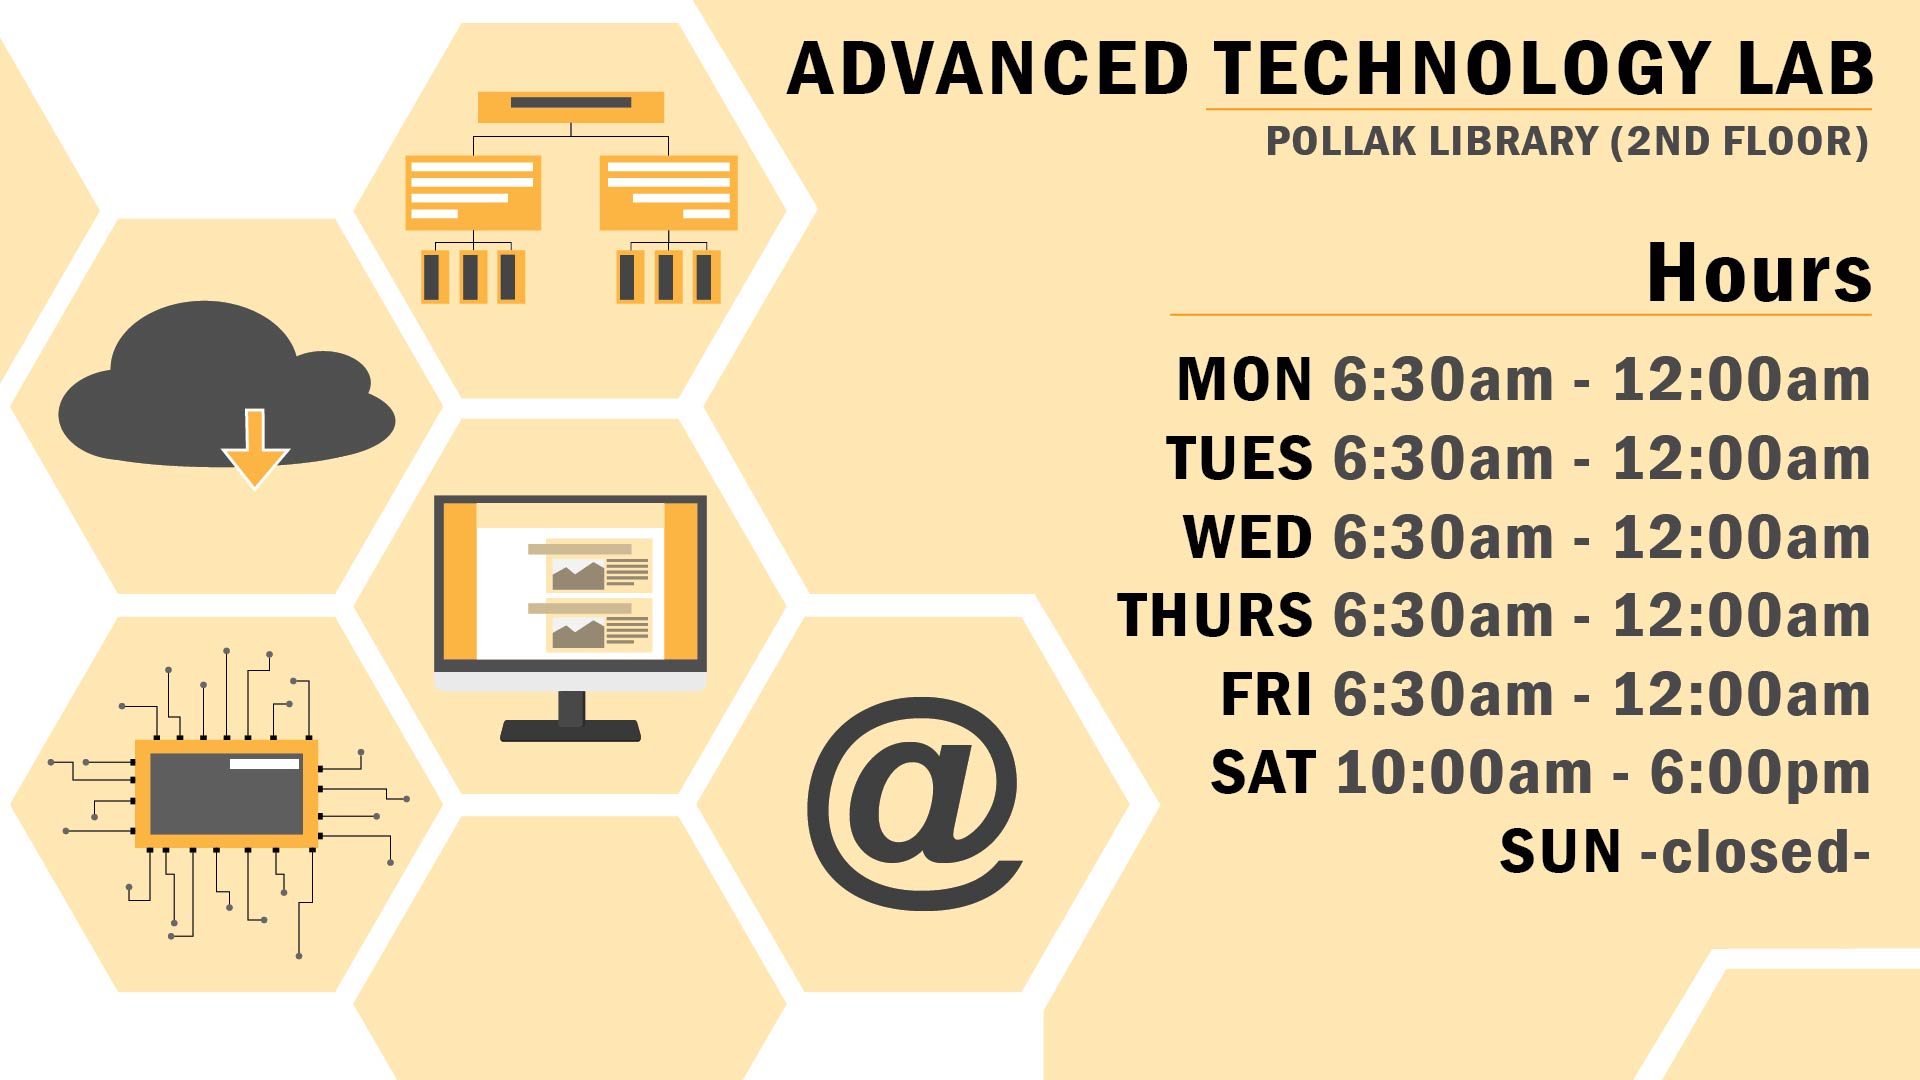 Digital Sign advertising the Advanced Technology Lab Hours